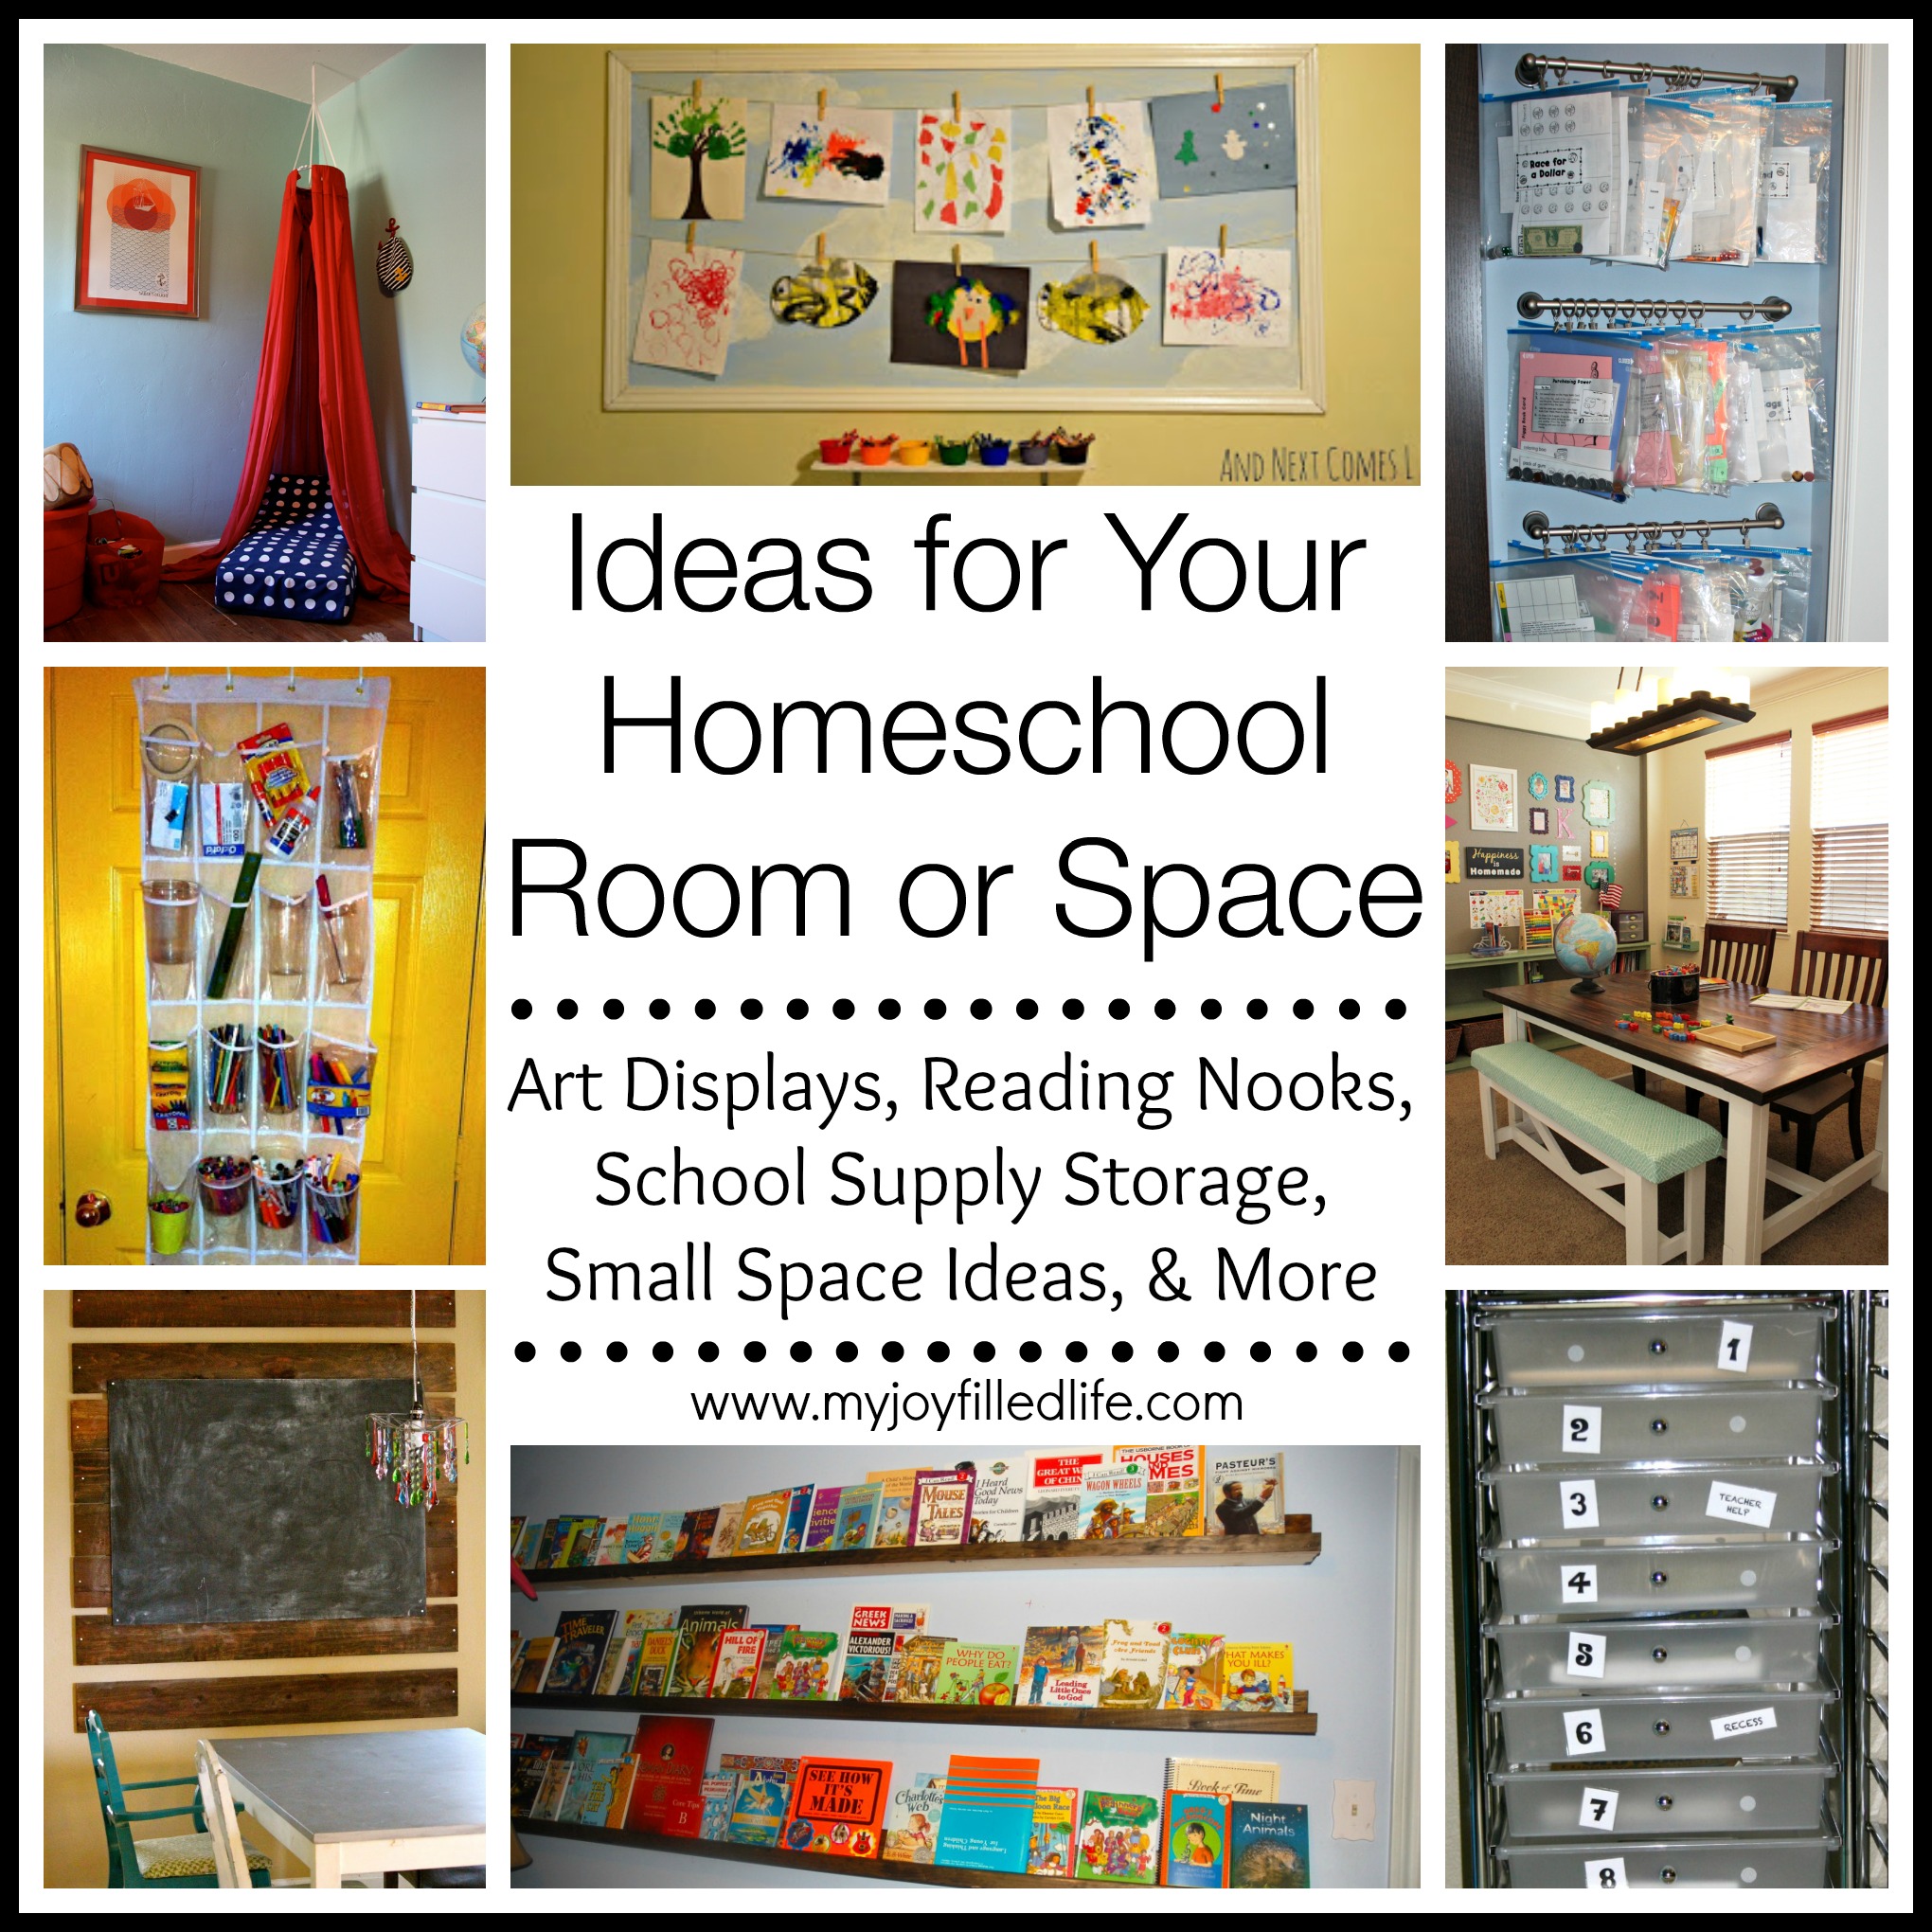 Ideas for Your Homeschool Room or Space - My Joy-Filled Life